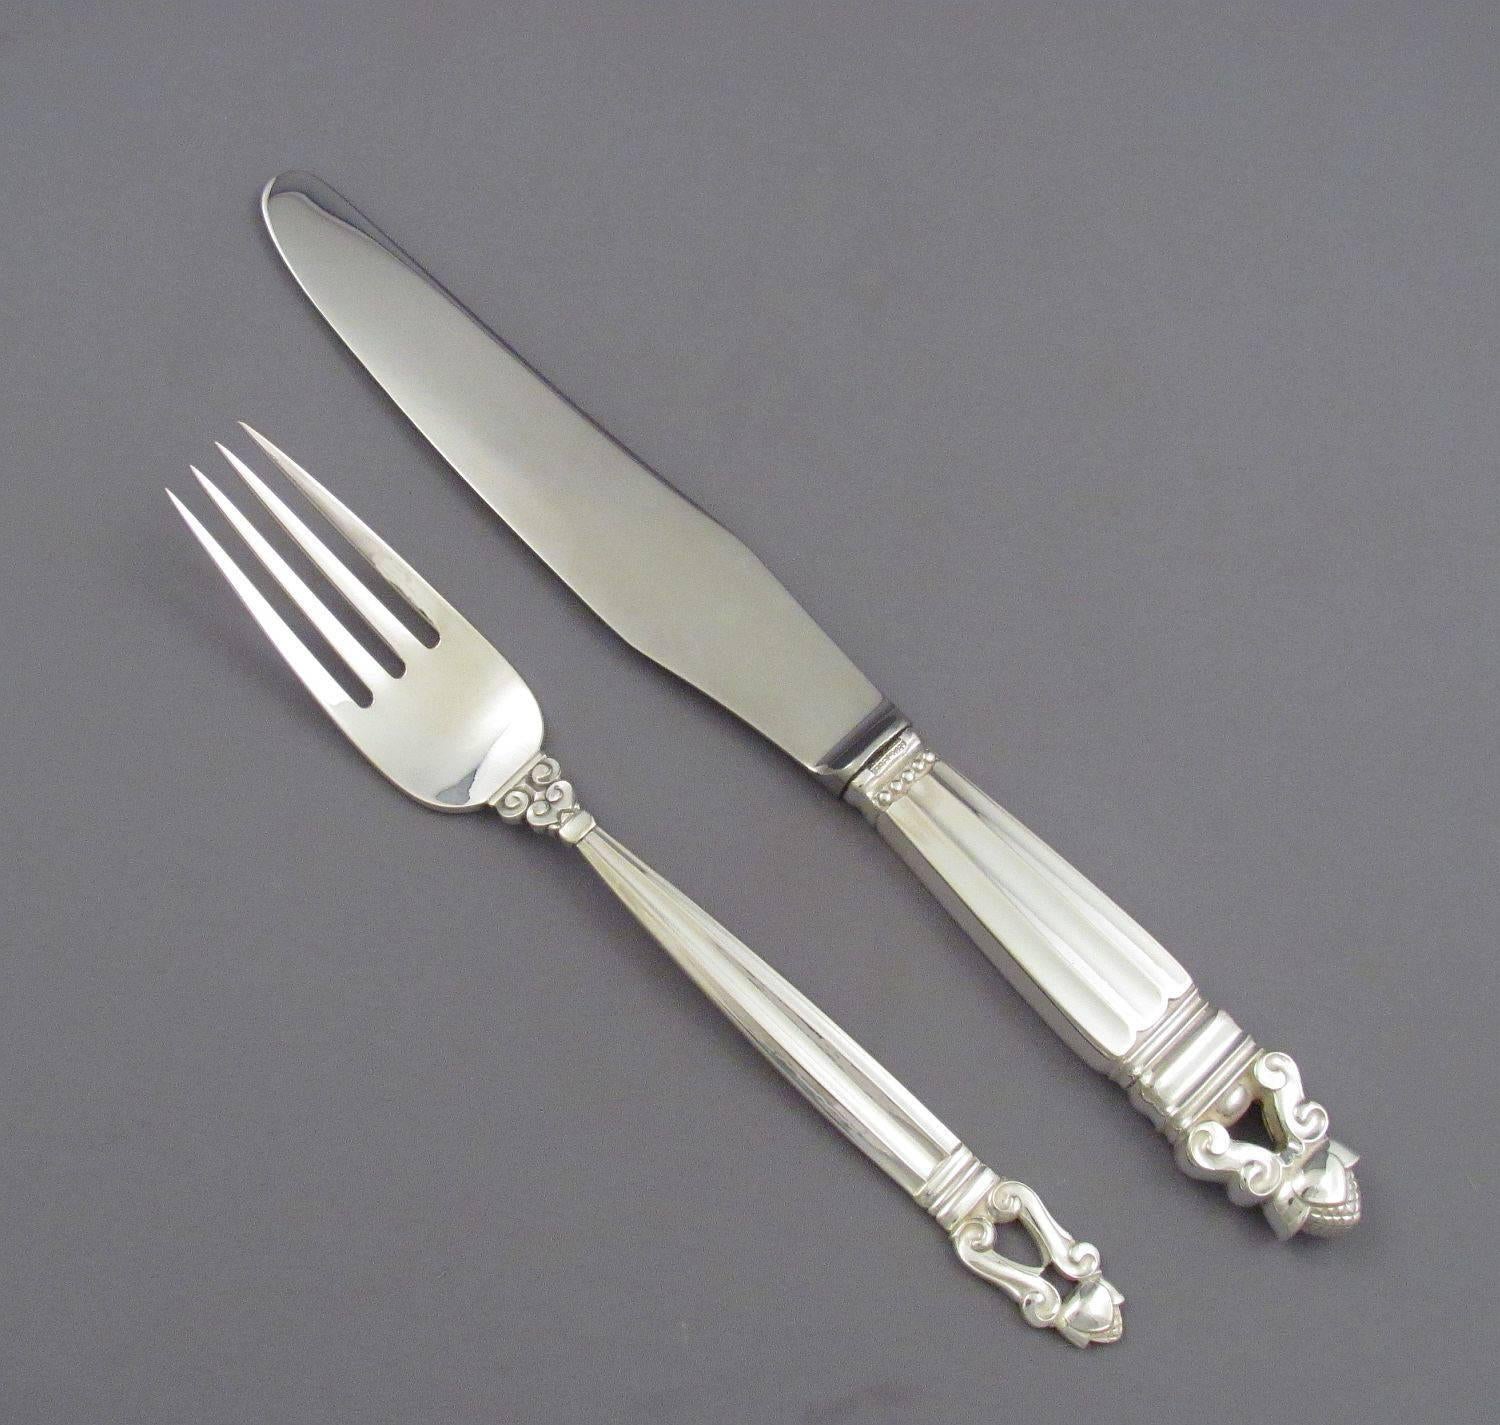 A Georg Jensen Acorn pattern flatware service for 12 in sterling silver (designed by Johan Rohde in 1915) comprising:

12 dinner knives (continental size, 9 7/8